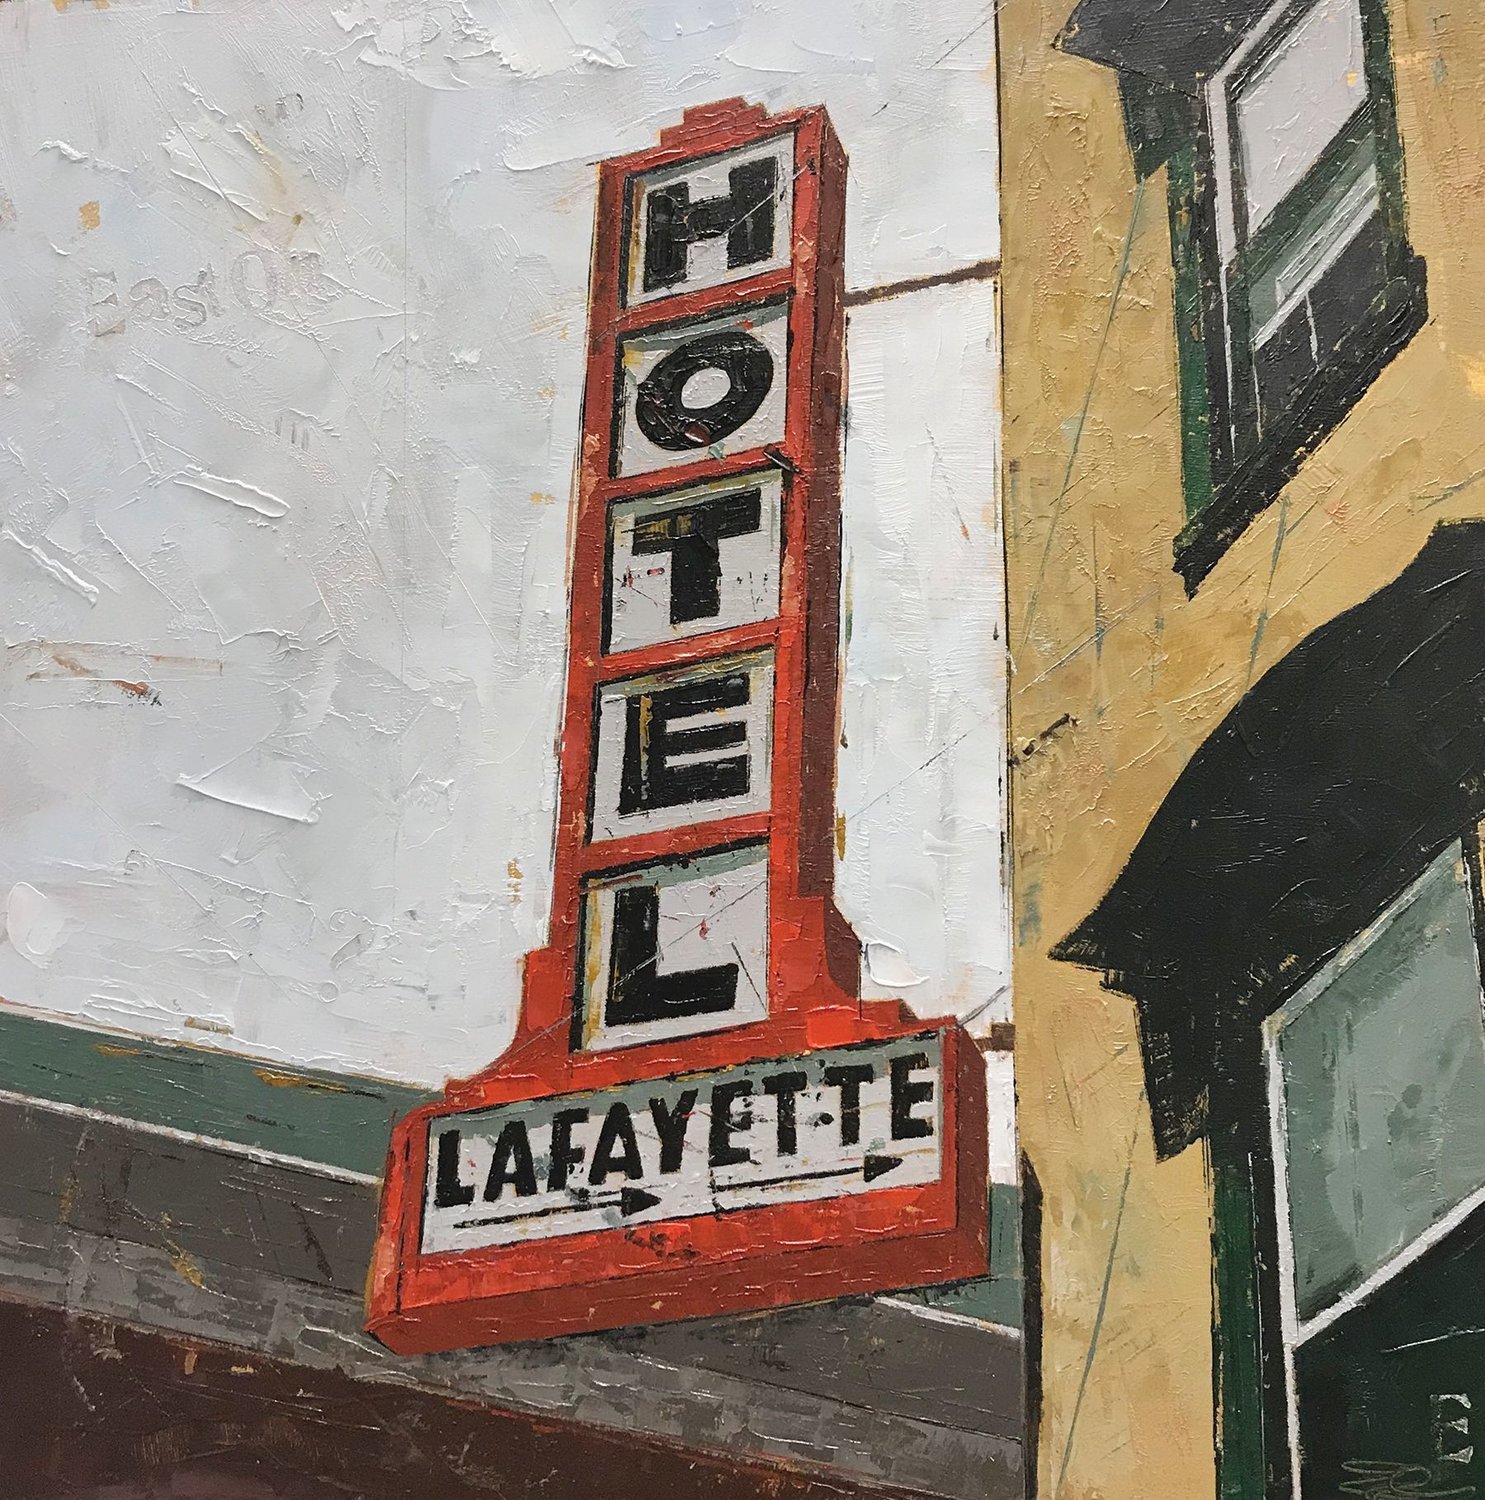 “Lafayette Hotel, Easton” is an oil painting by Emily Thompson.